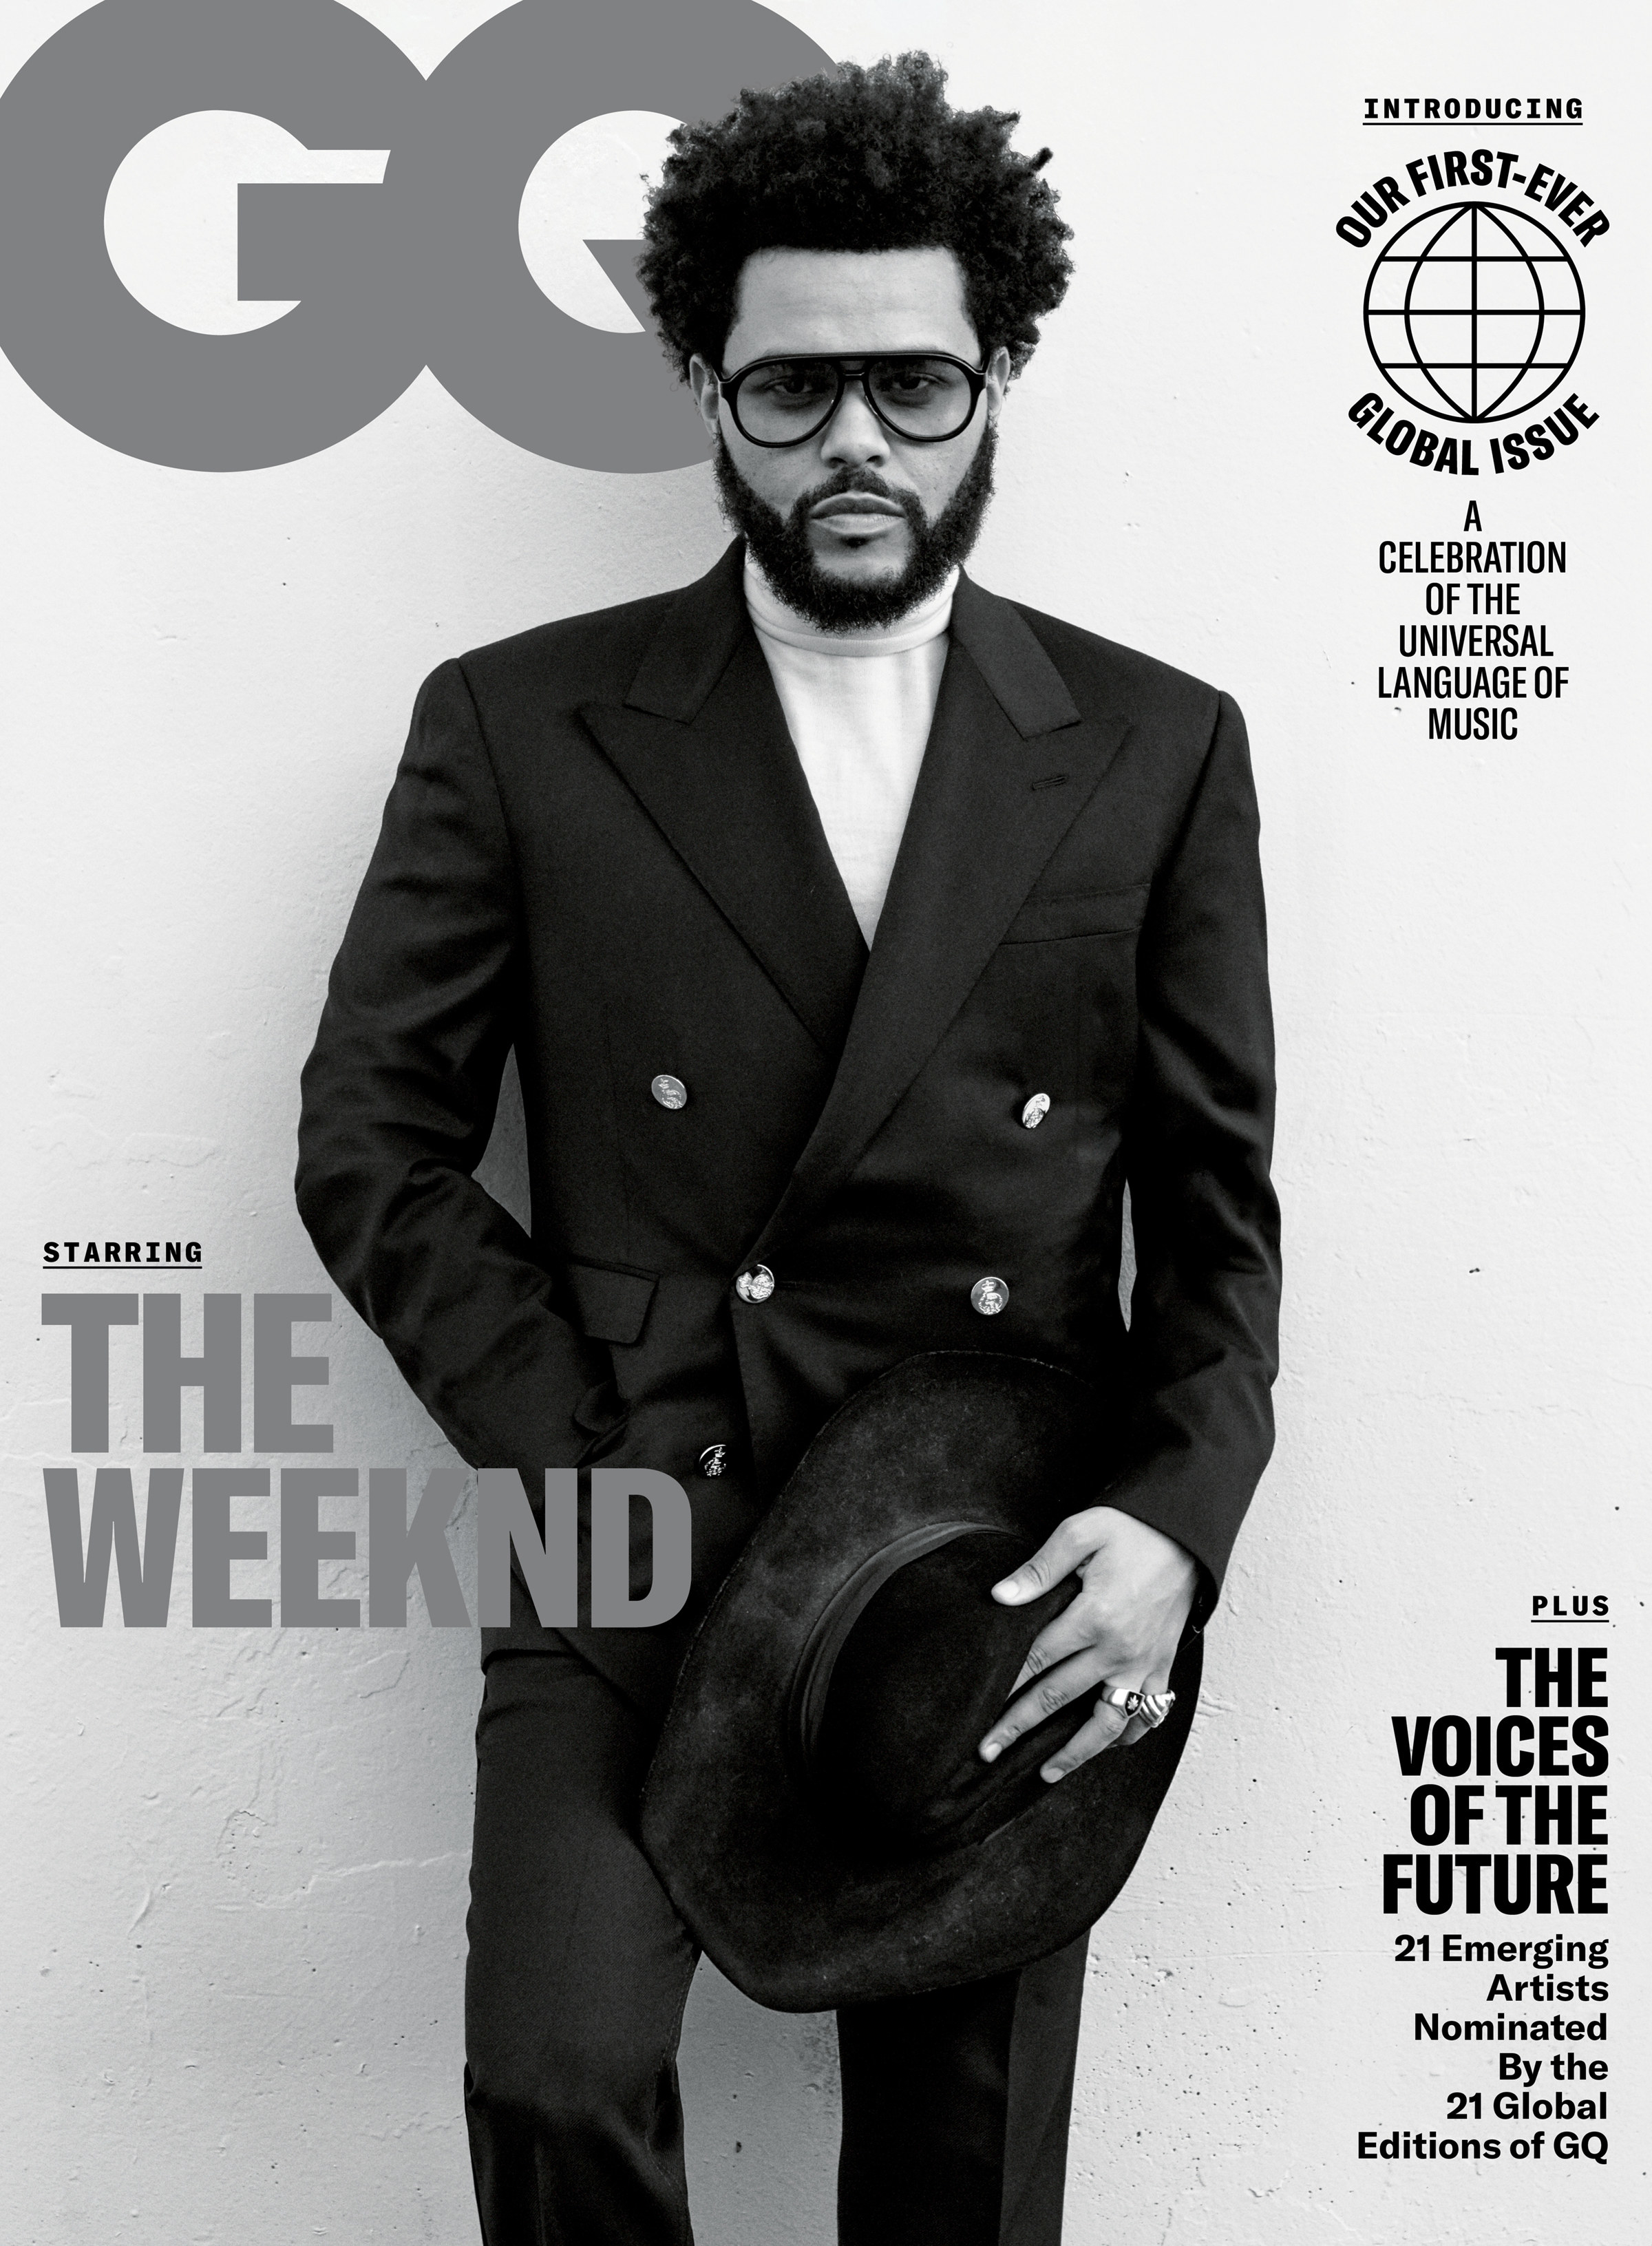 The Weeknd poses on the cover of GQ for its September issue